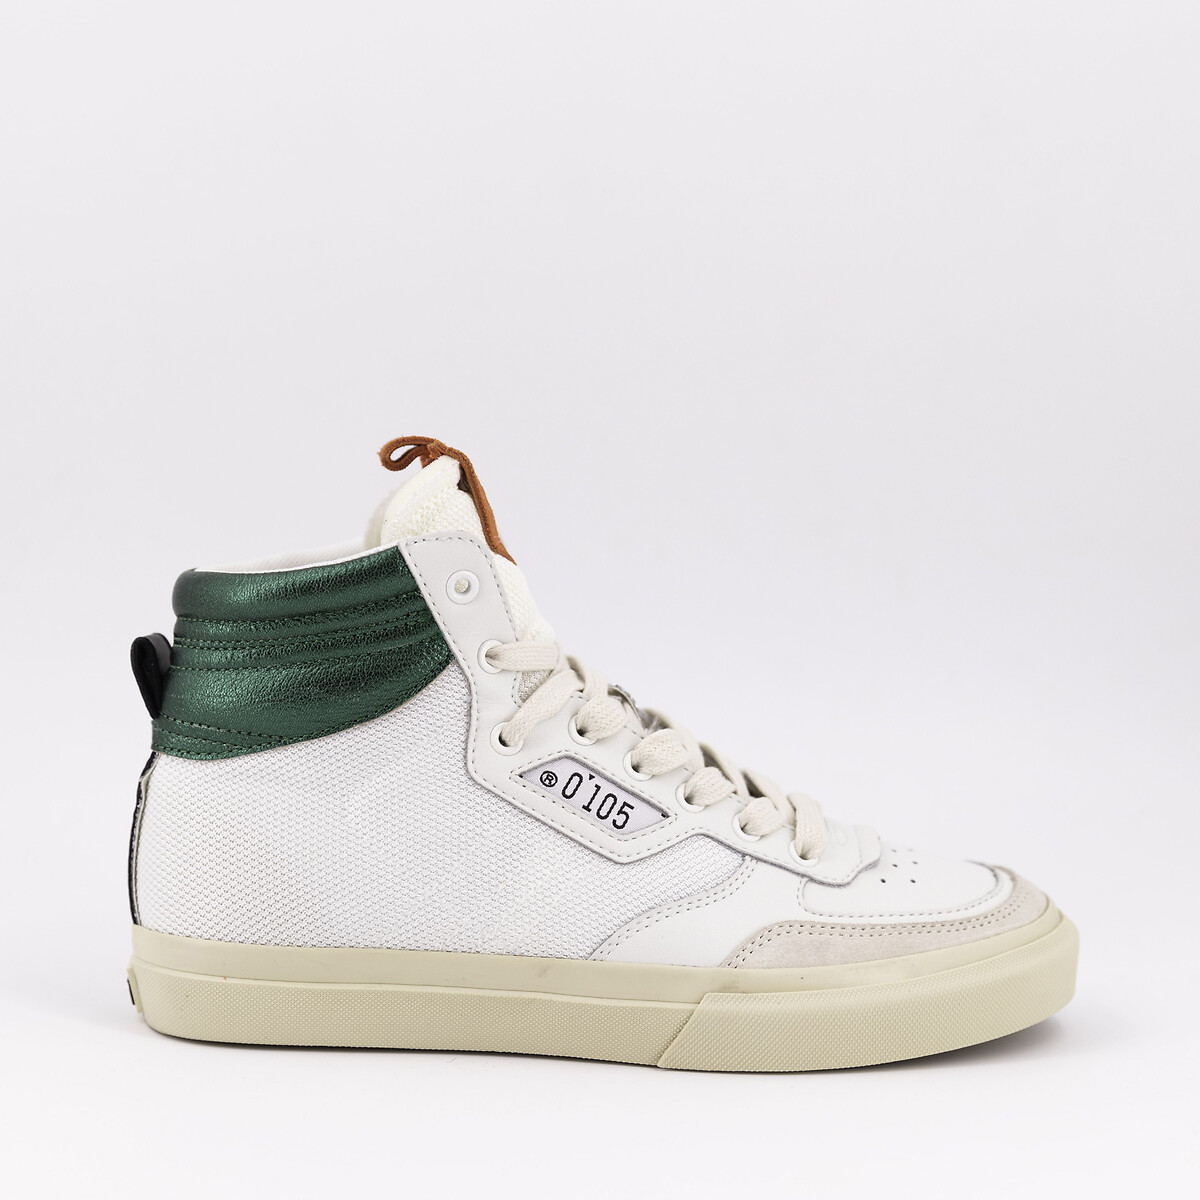 Huna High Top Trainers in Leather